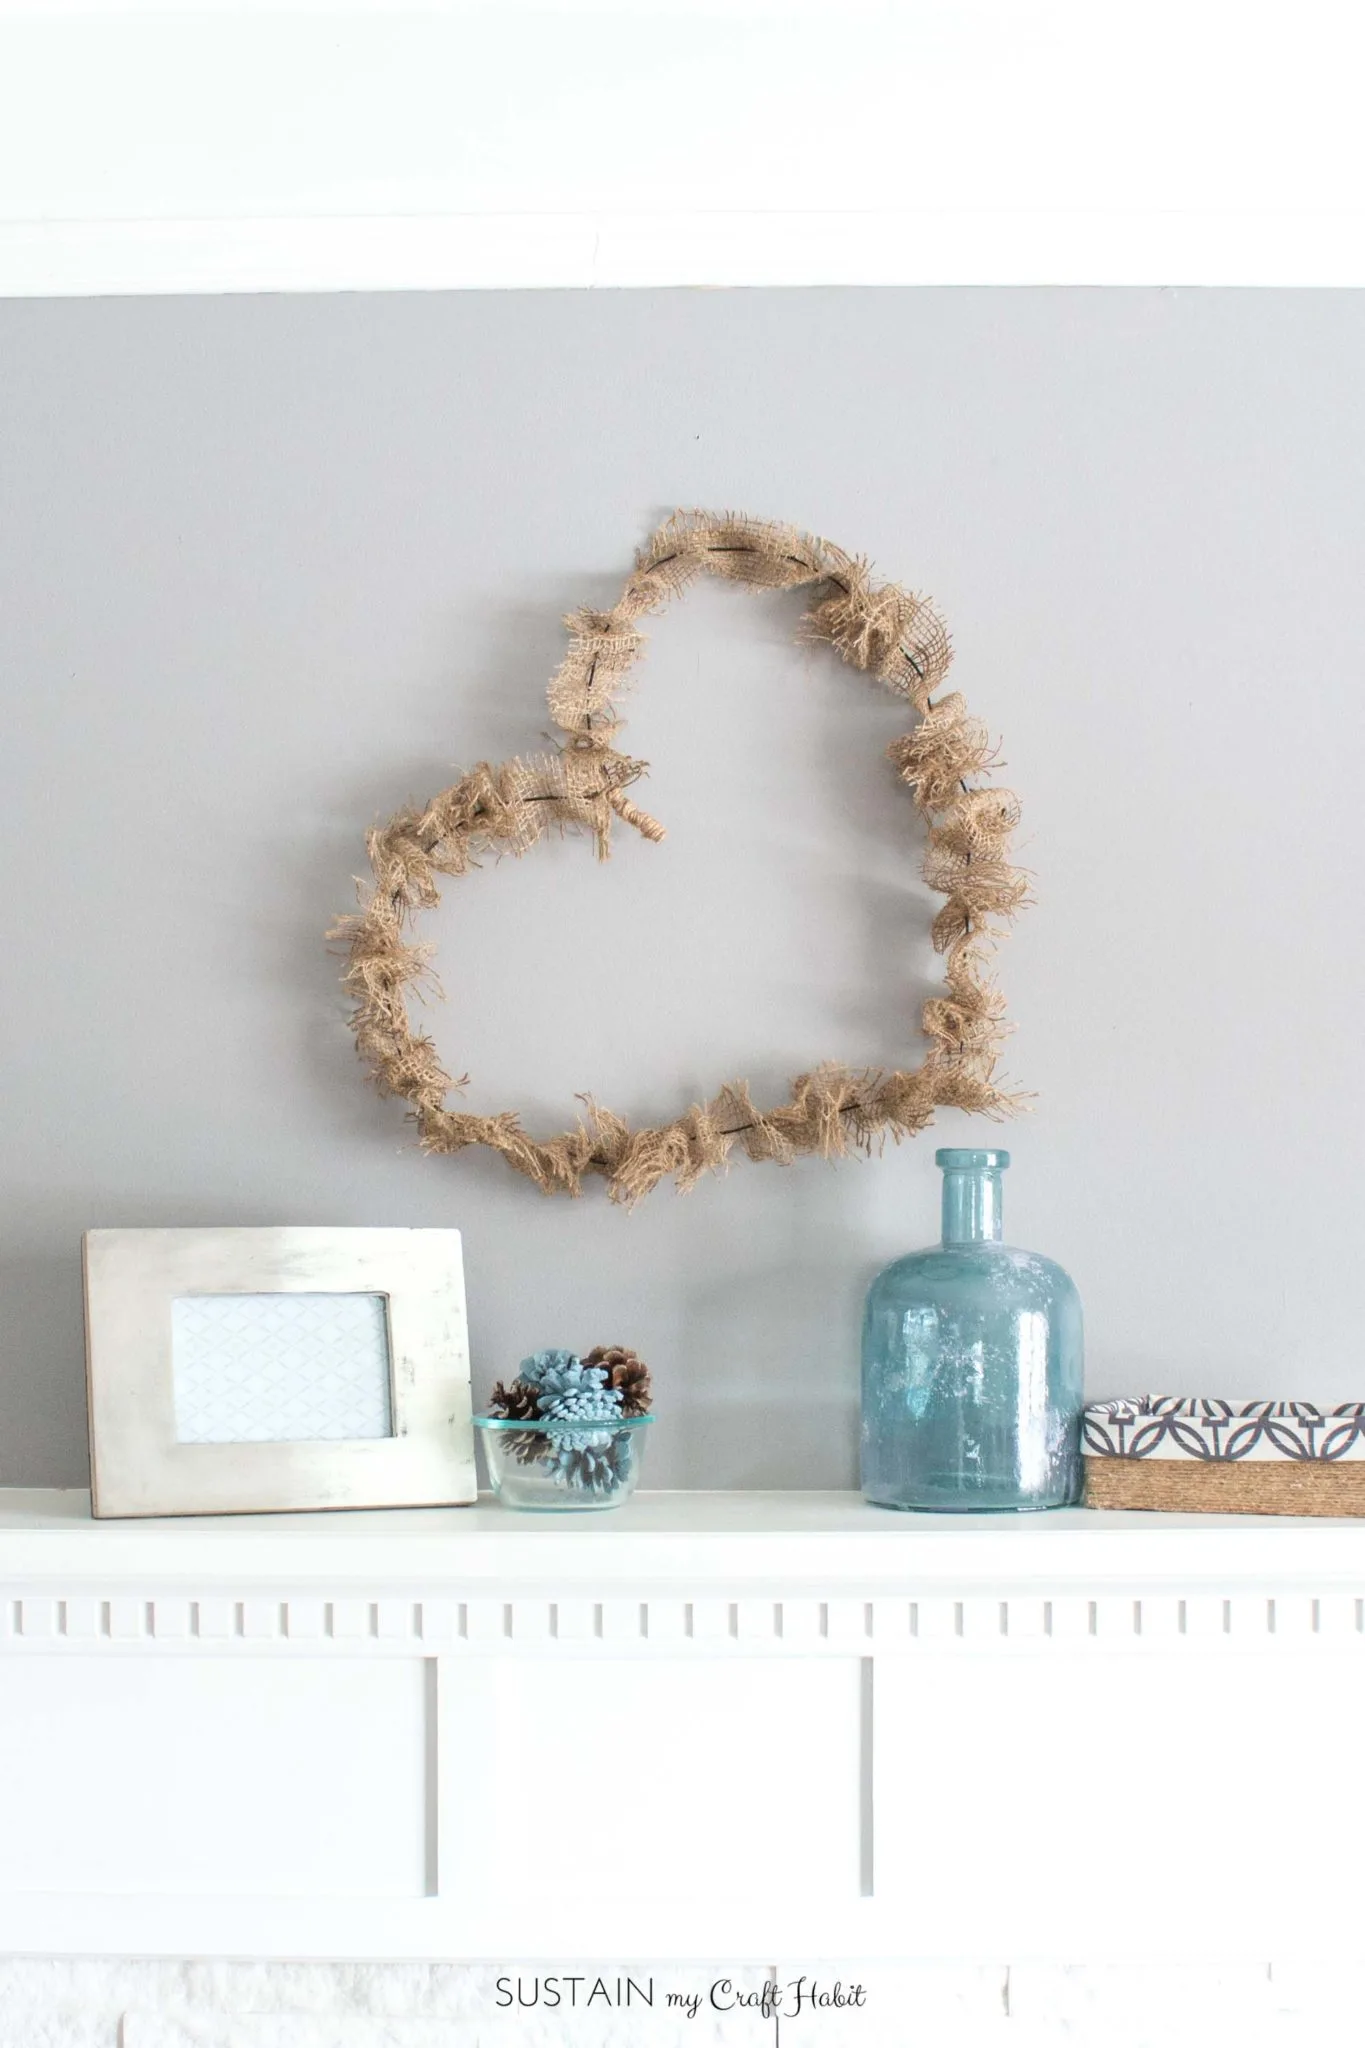 Simple heart-shaped rustic wreath with burlap.